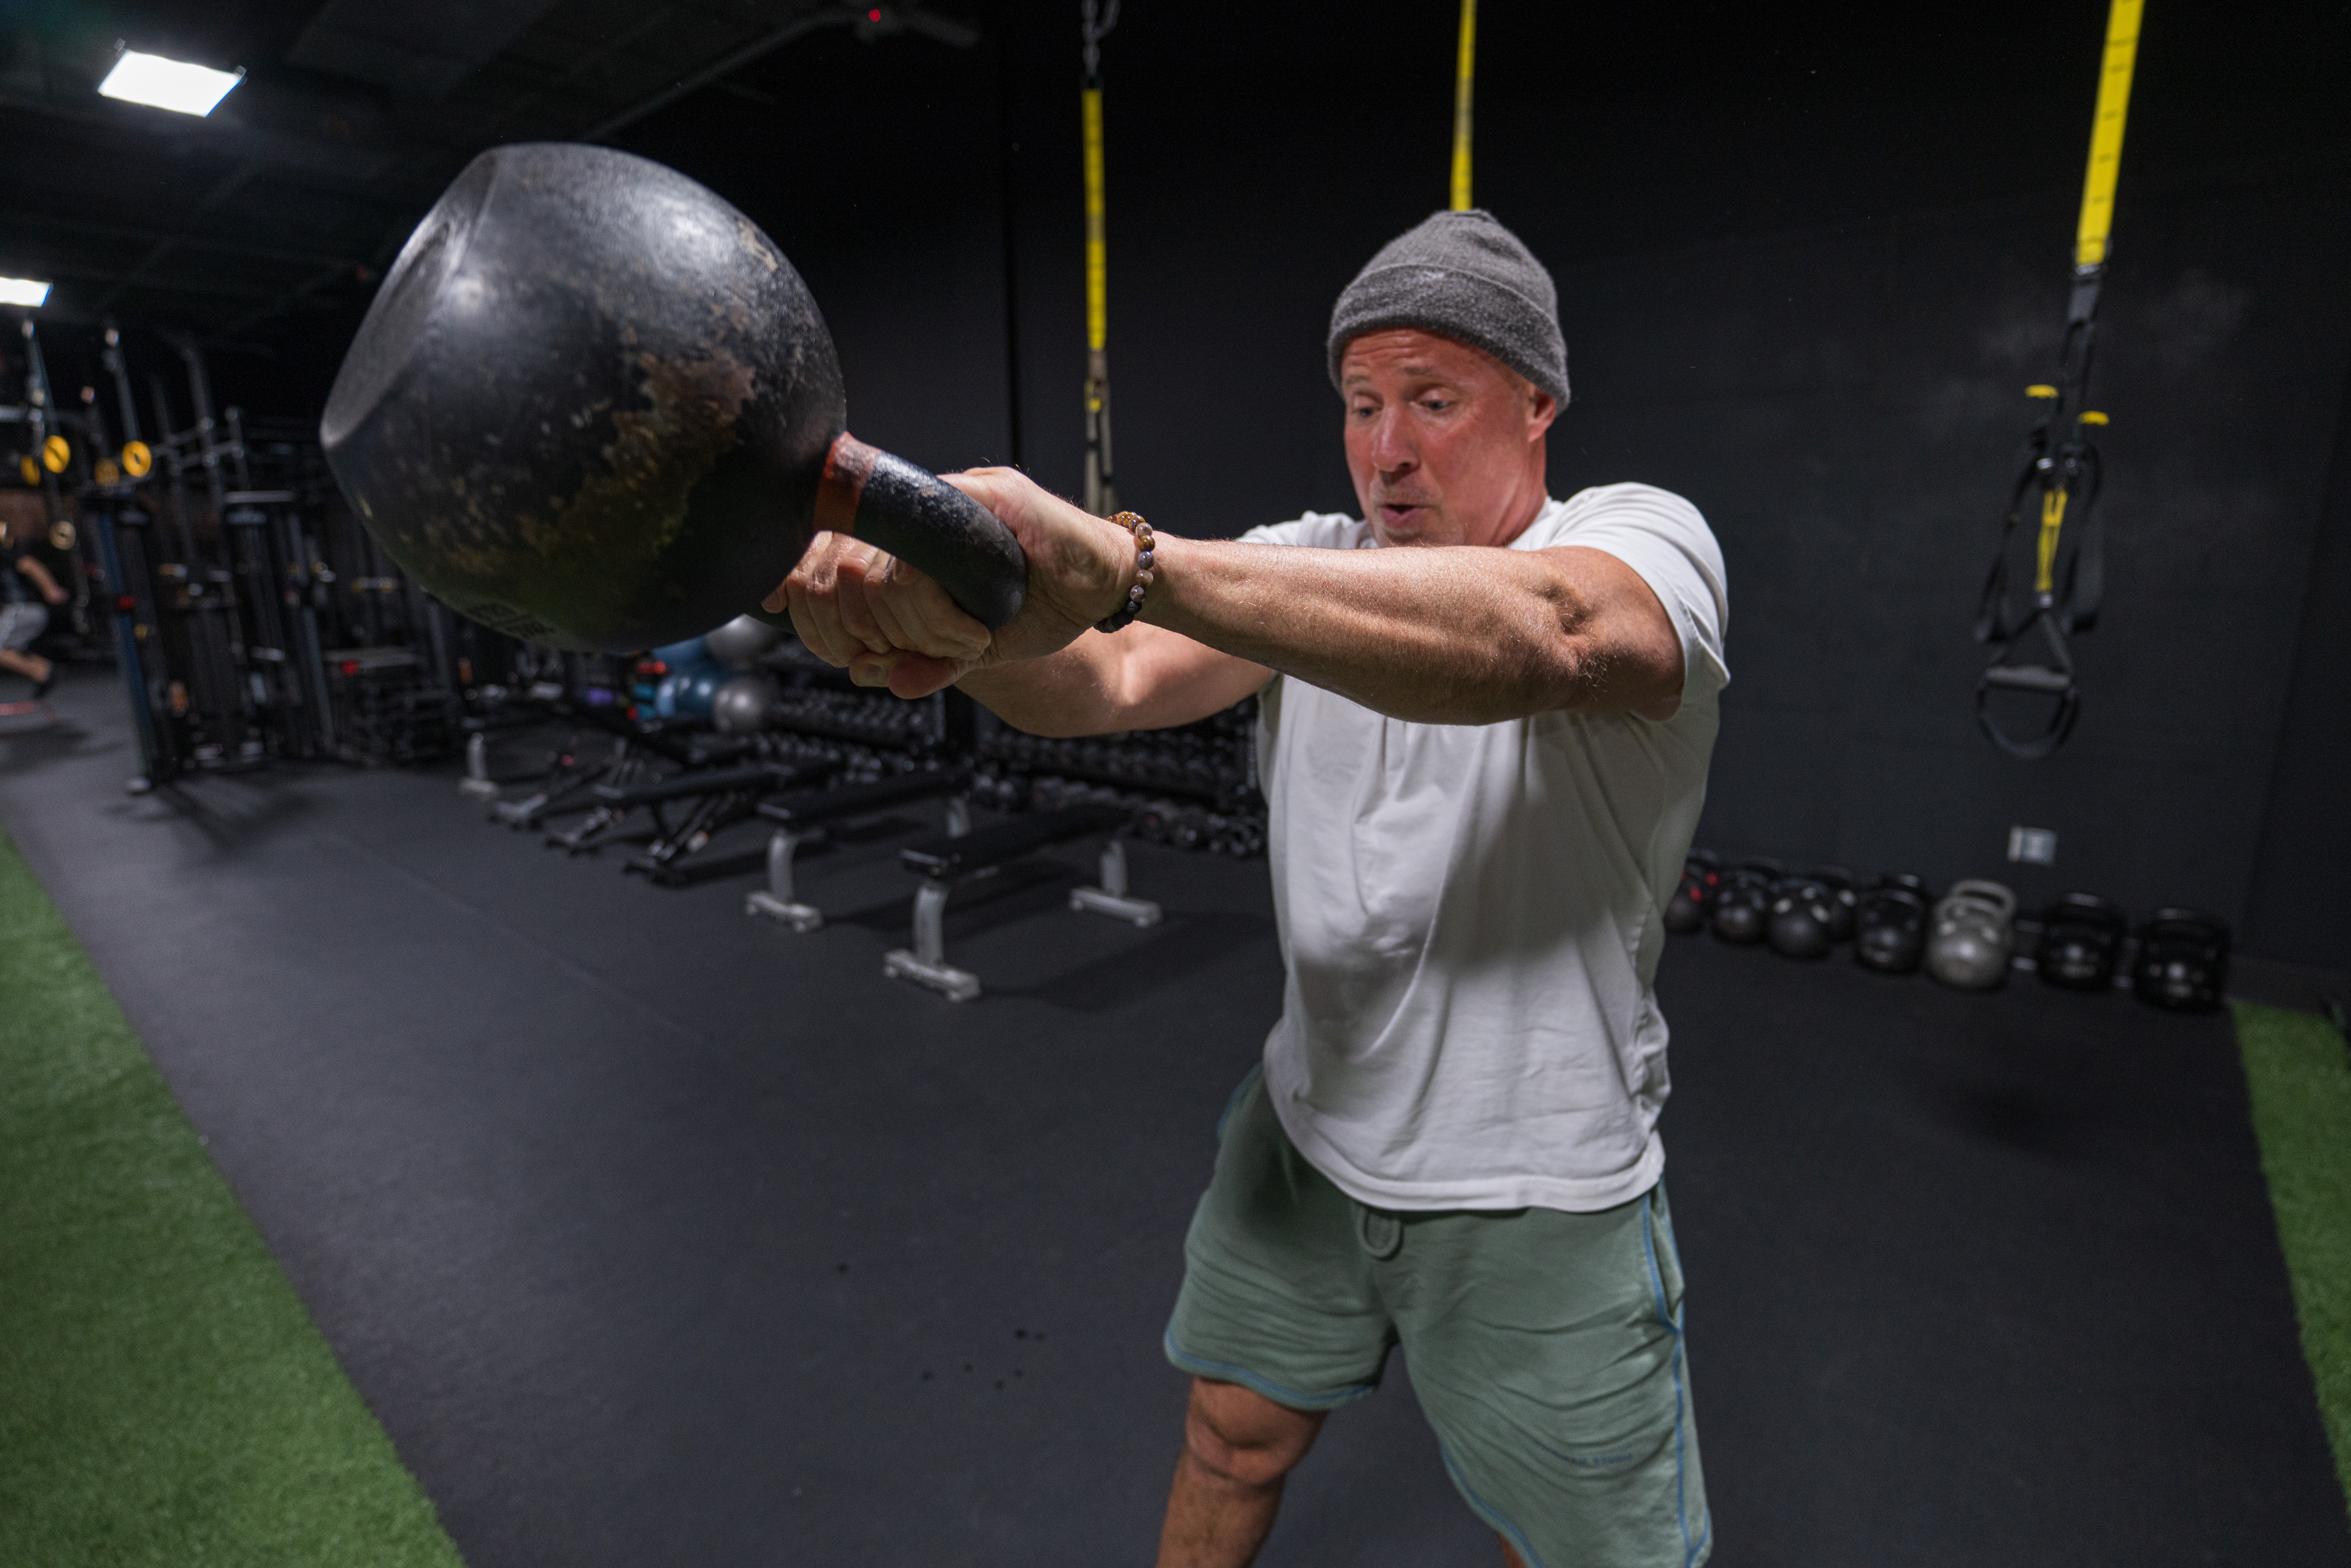 Dave Hudgens knocking out some Kettlebell Swings at Beyond Strength in Sterling, Virginia